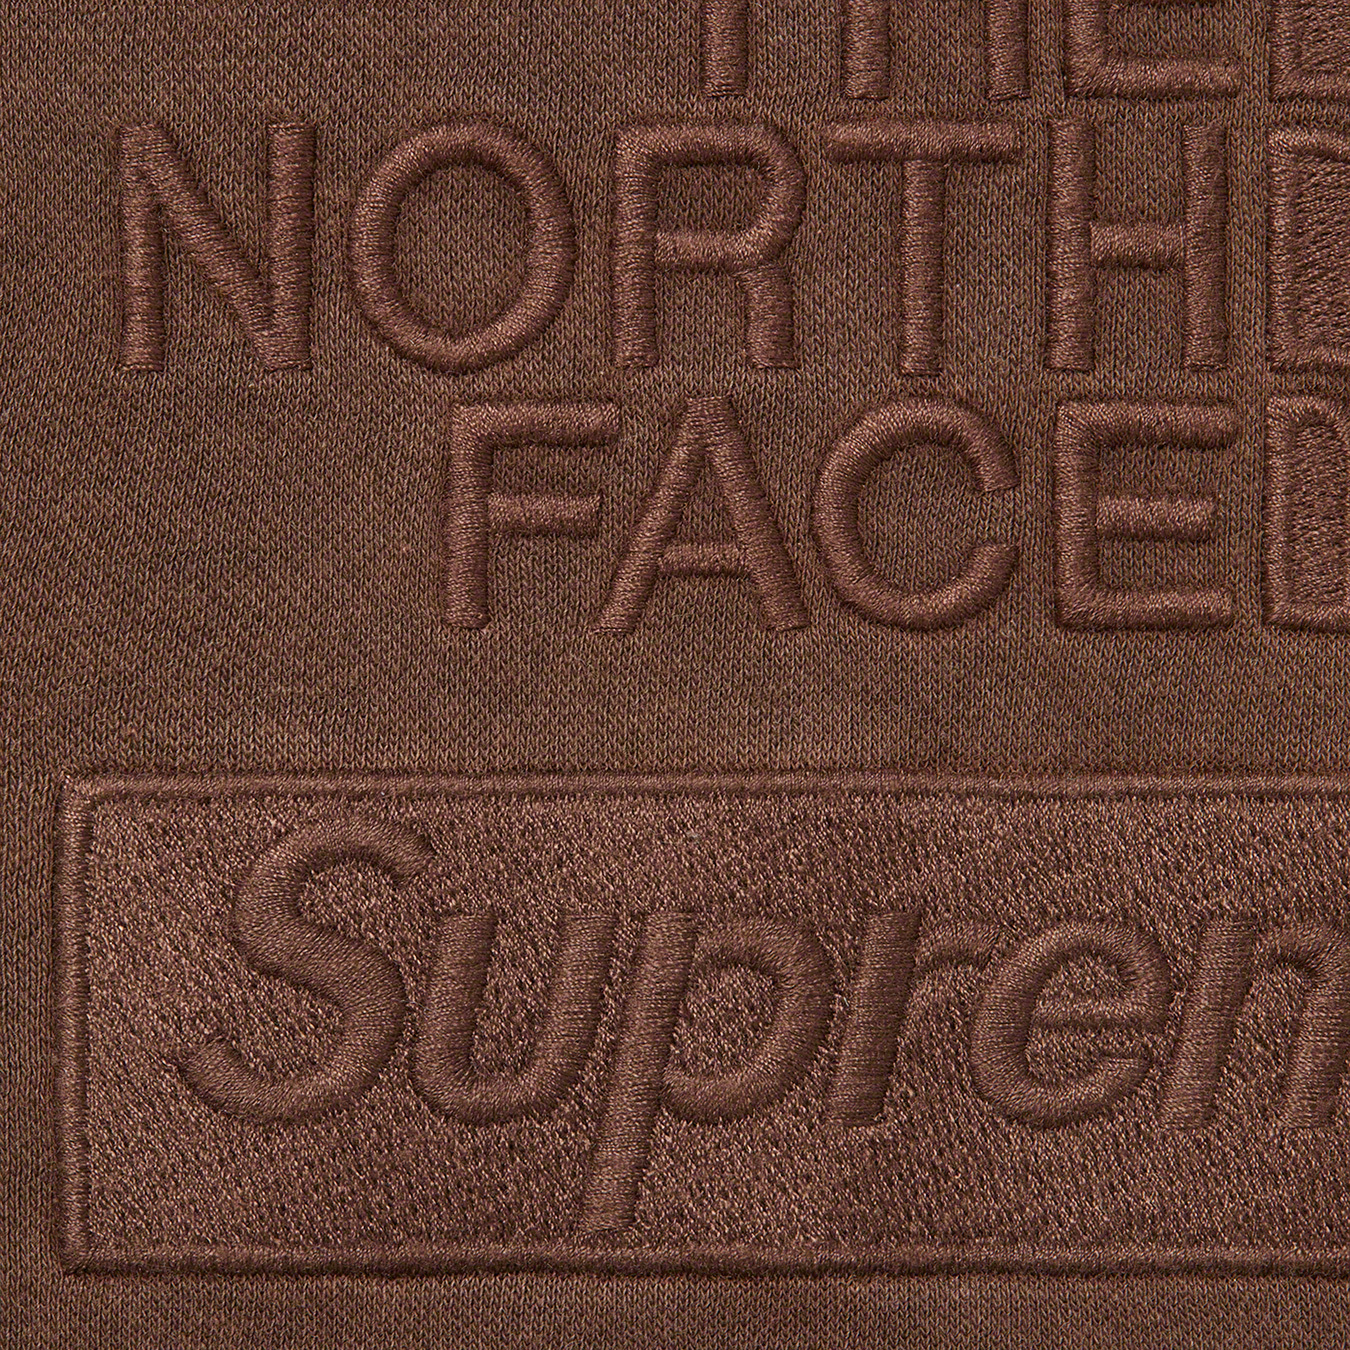 The North Face Pigment Printed Hooded Sweatshirt - fall